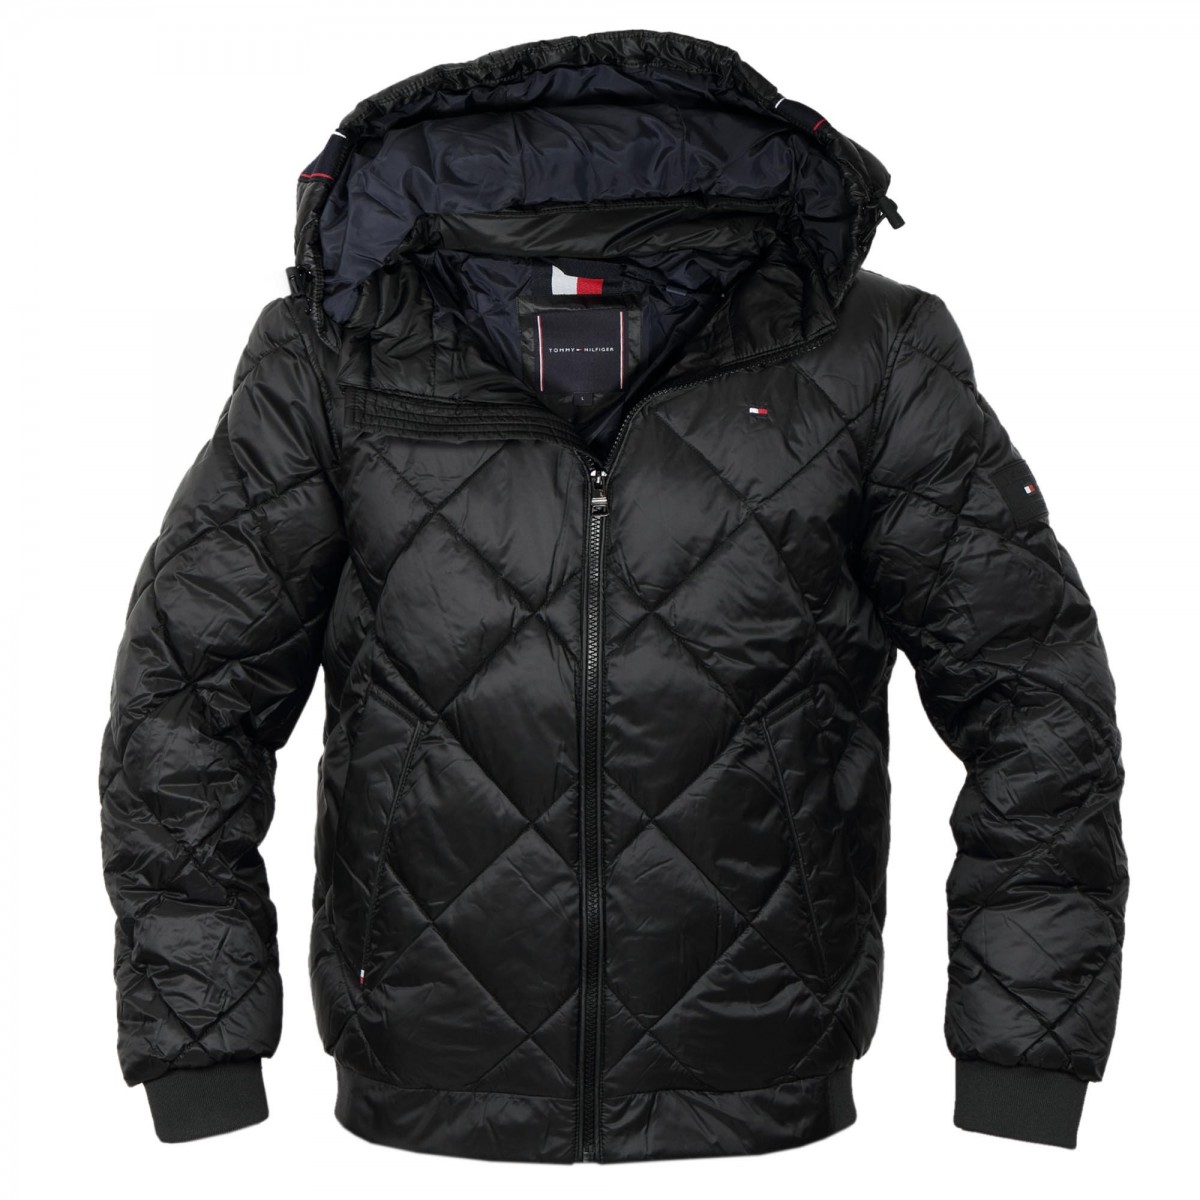 TOMMY HILFIGER DIAMOND QUILTED HOODED JACKET